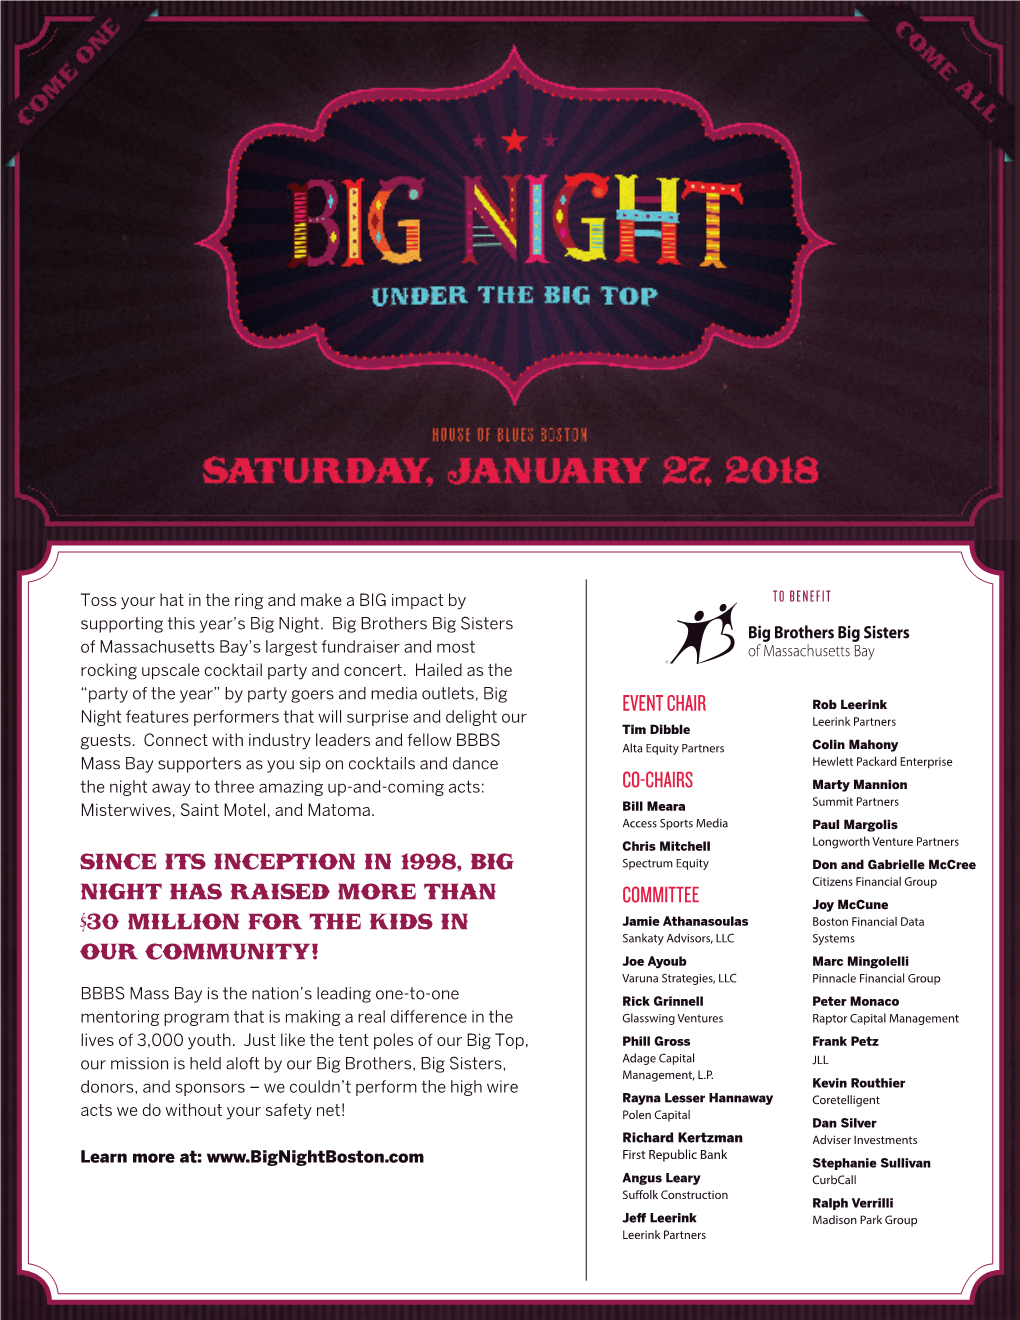 Since Its Inception in 1998, Big Night Has Raised More Than $30 Million For